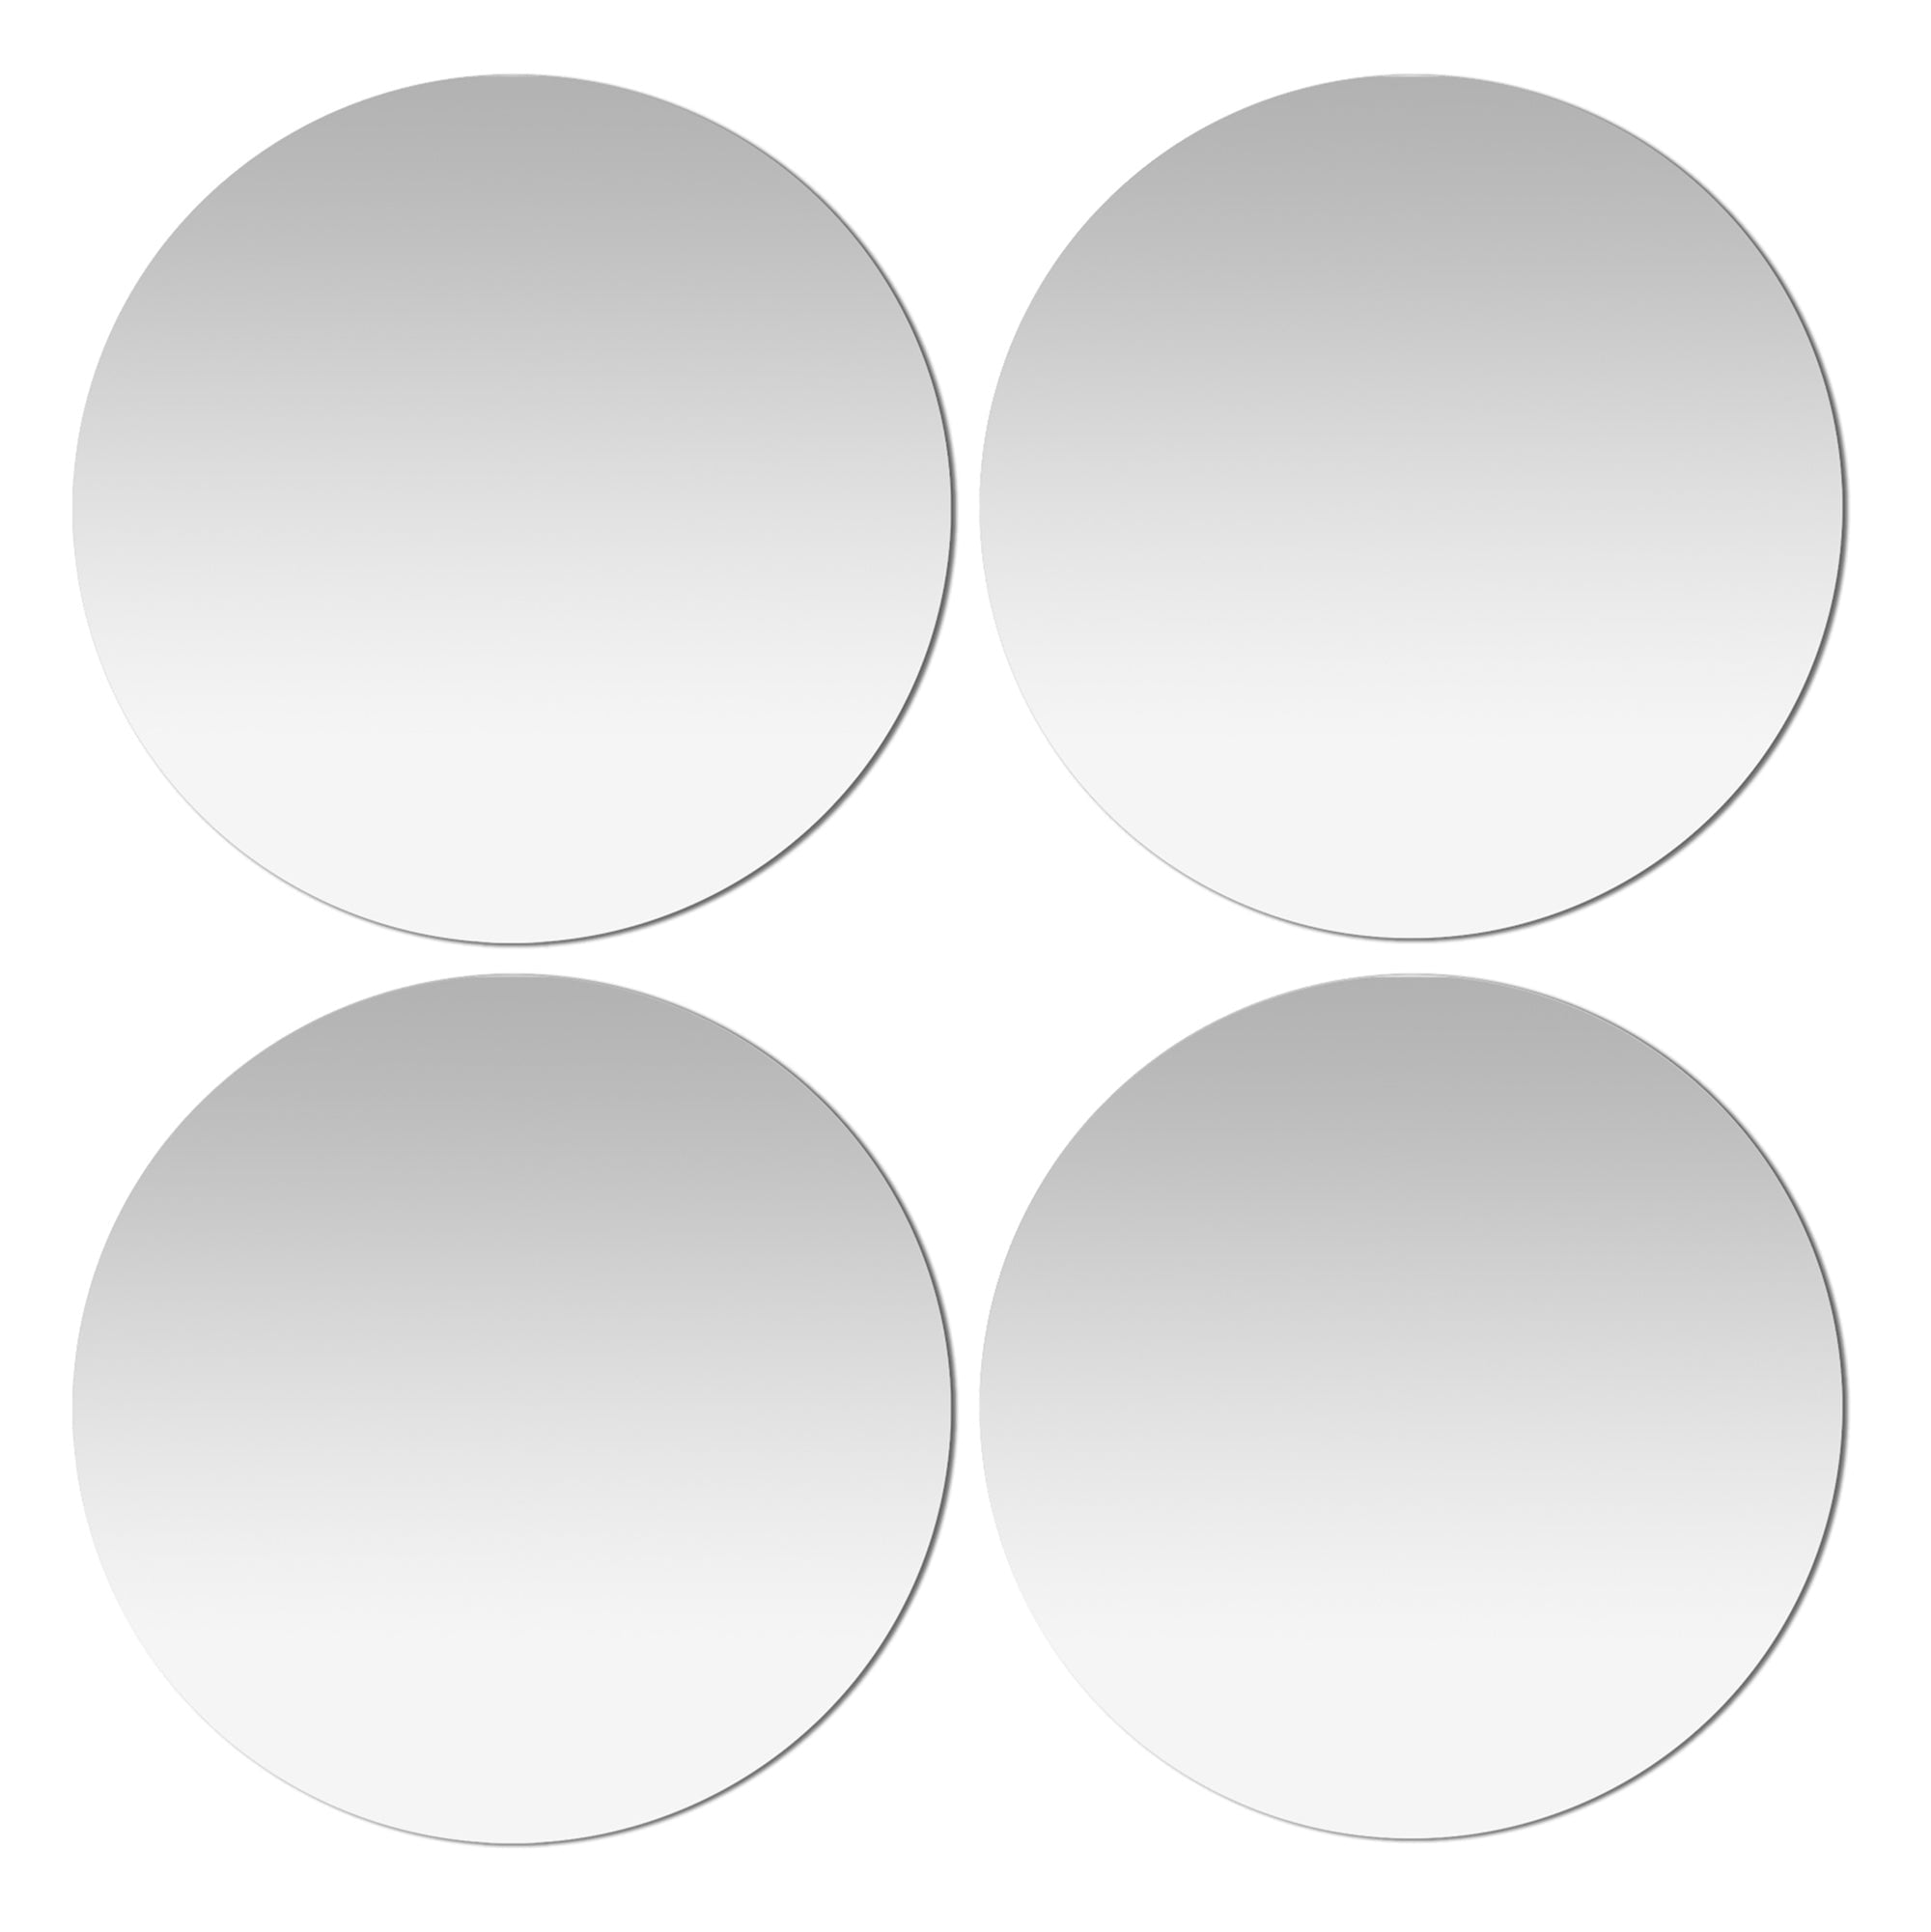 Americanflat Adhesive Mirror Tiles - Exclamation Rectangular Design - Peel  and Stick Mirrors for Wall Frameless Mirrors for Bedroom and Living Room  Decor (4pcs Set)